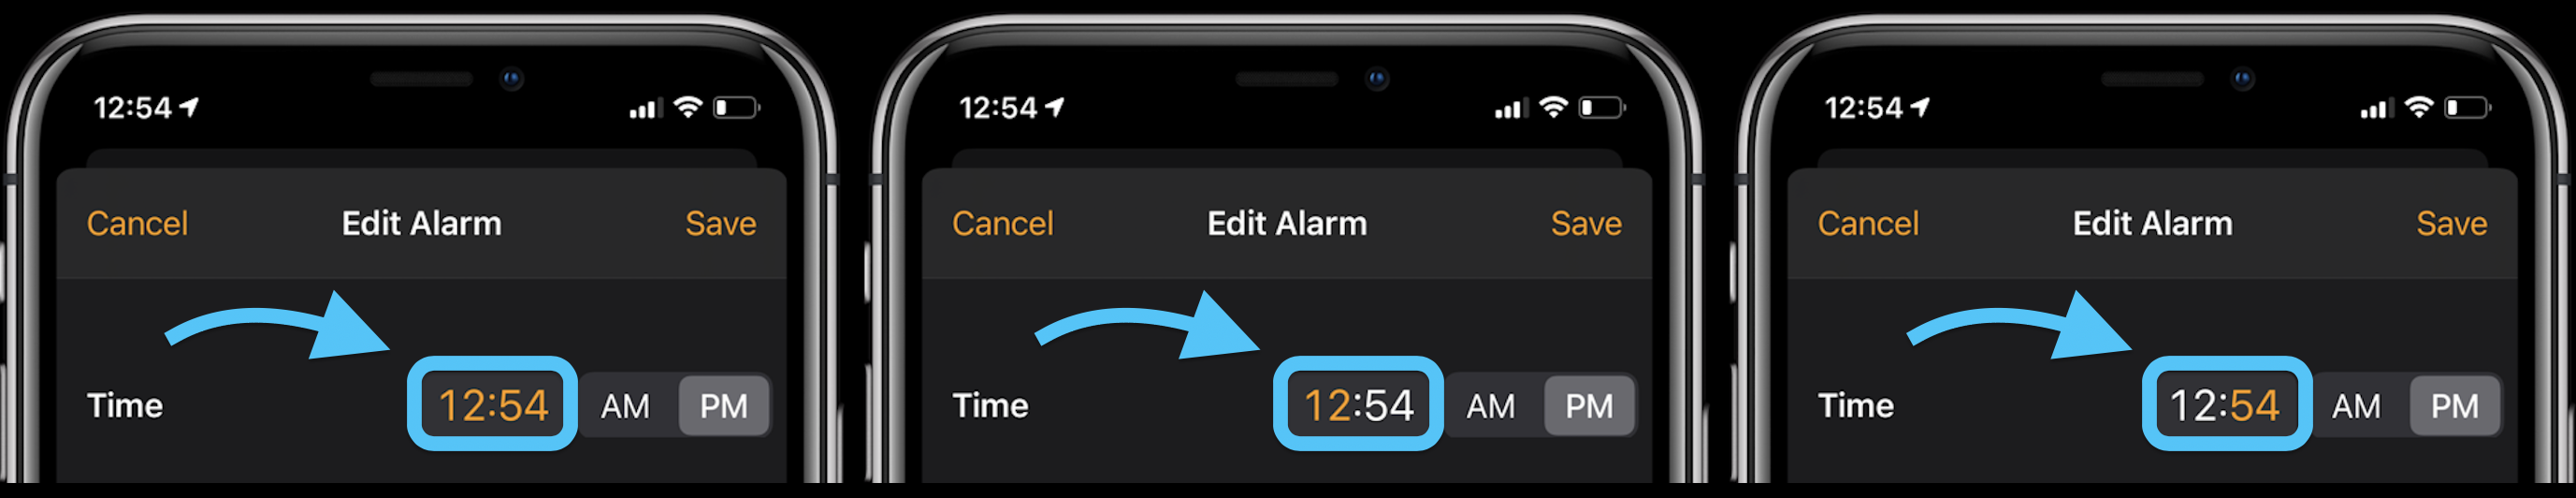 How to use new iPhone alarms UI in iOS 14